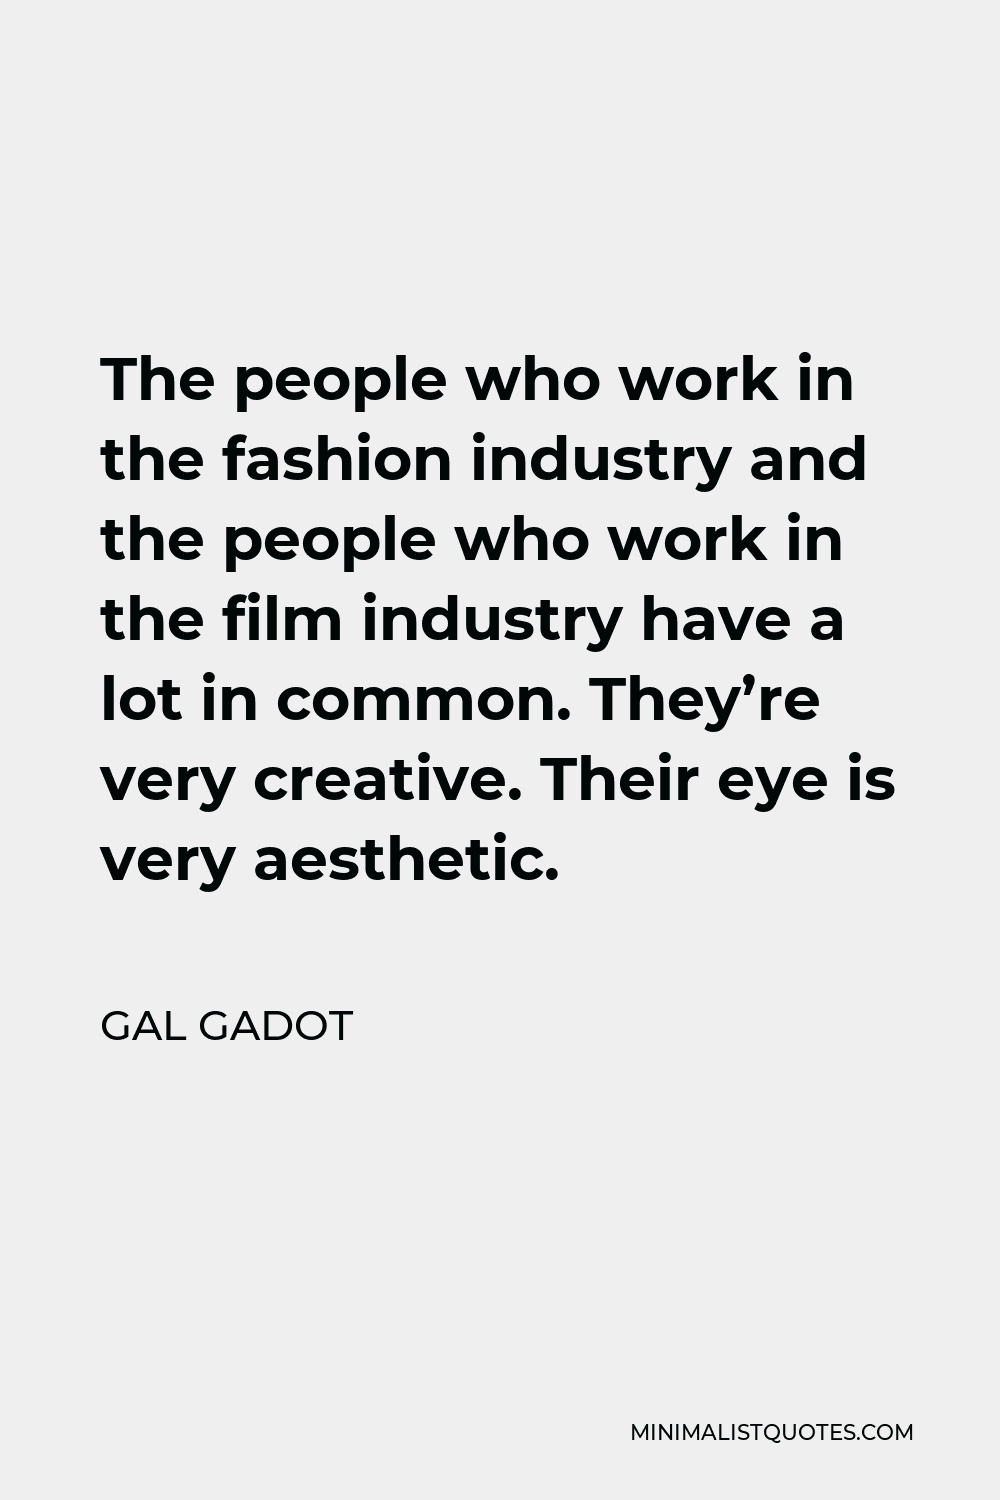 Gal Gadot Quote - The people who work in the fashion industry and the people who work in the film industry have a lot in common. They’re very creative. Their eye is very aesthetic.